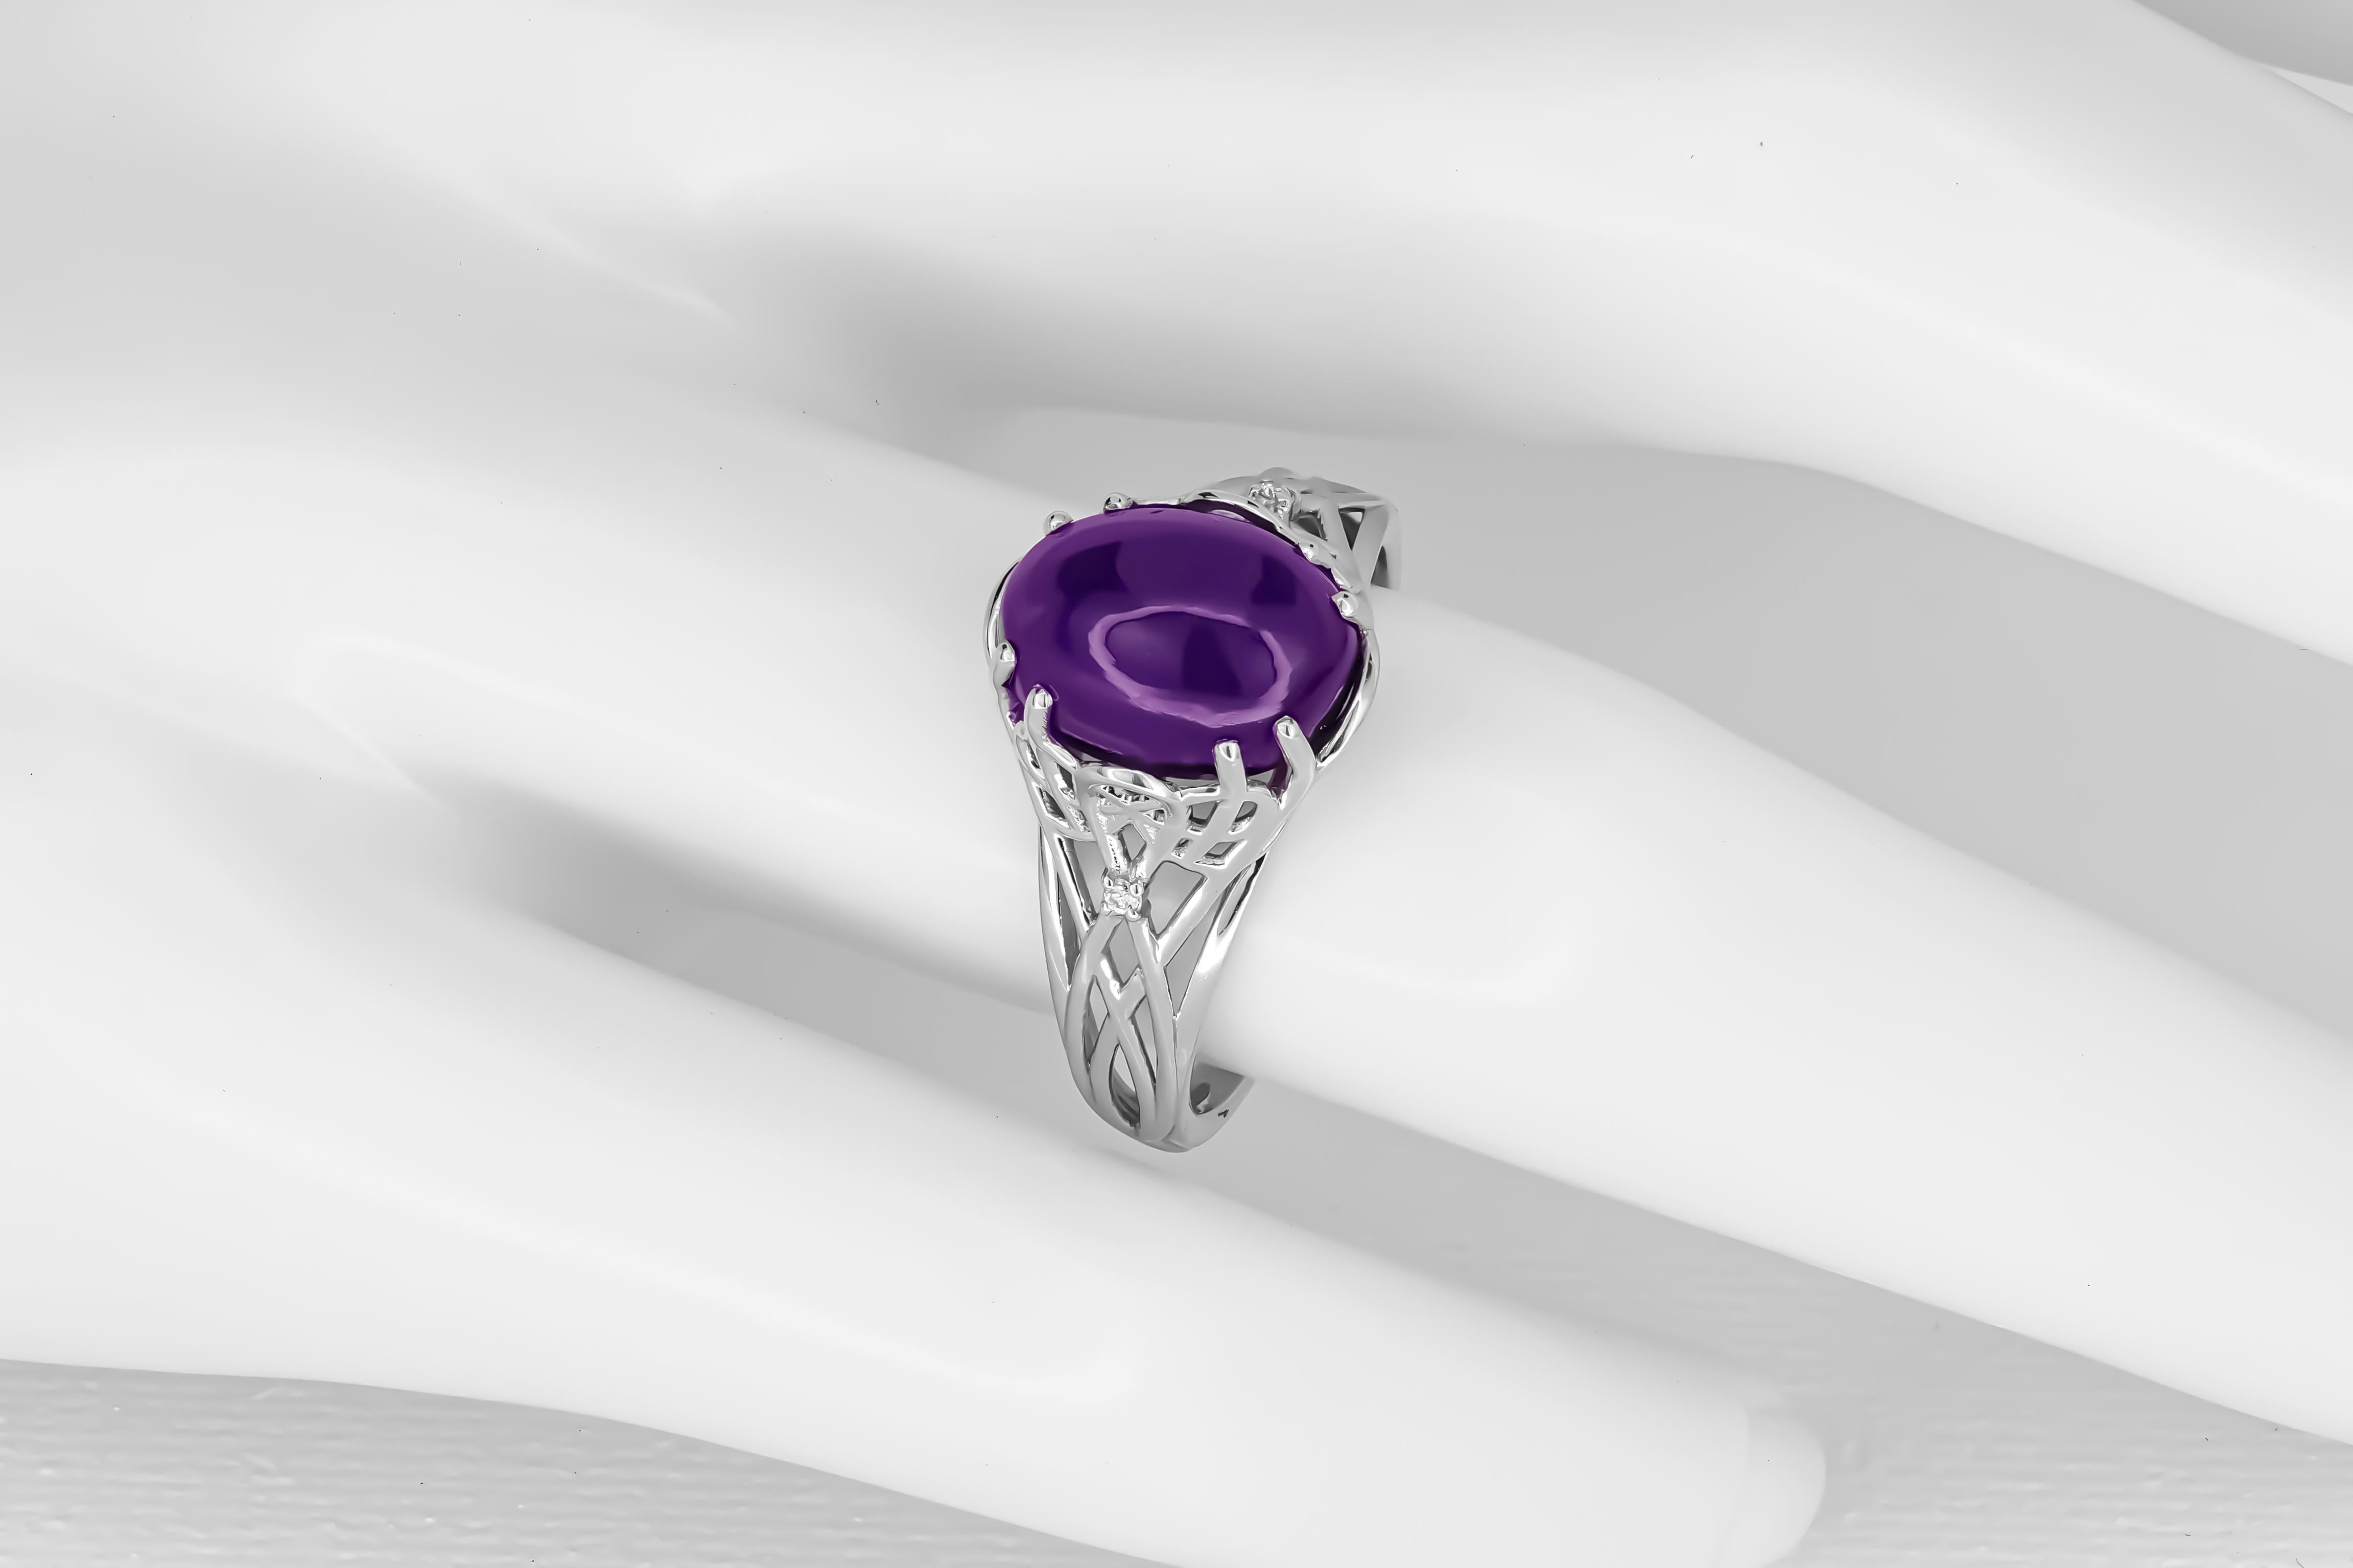 Amethyst cabochon 14k gold ring. 
Oval cab amethyst ring. Purple gemstone ring. Amethyst cocktail gold ring. Amethyst statement ring. February birthstone ring.

Metal: 14k gold
Weight: 2.7 gr depends from size
Amethyst: oval cabochon shape, purple